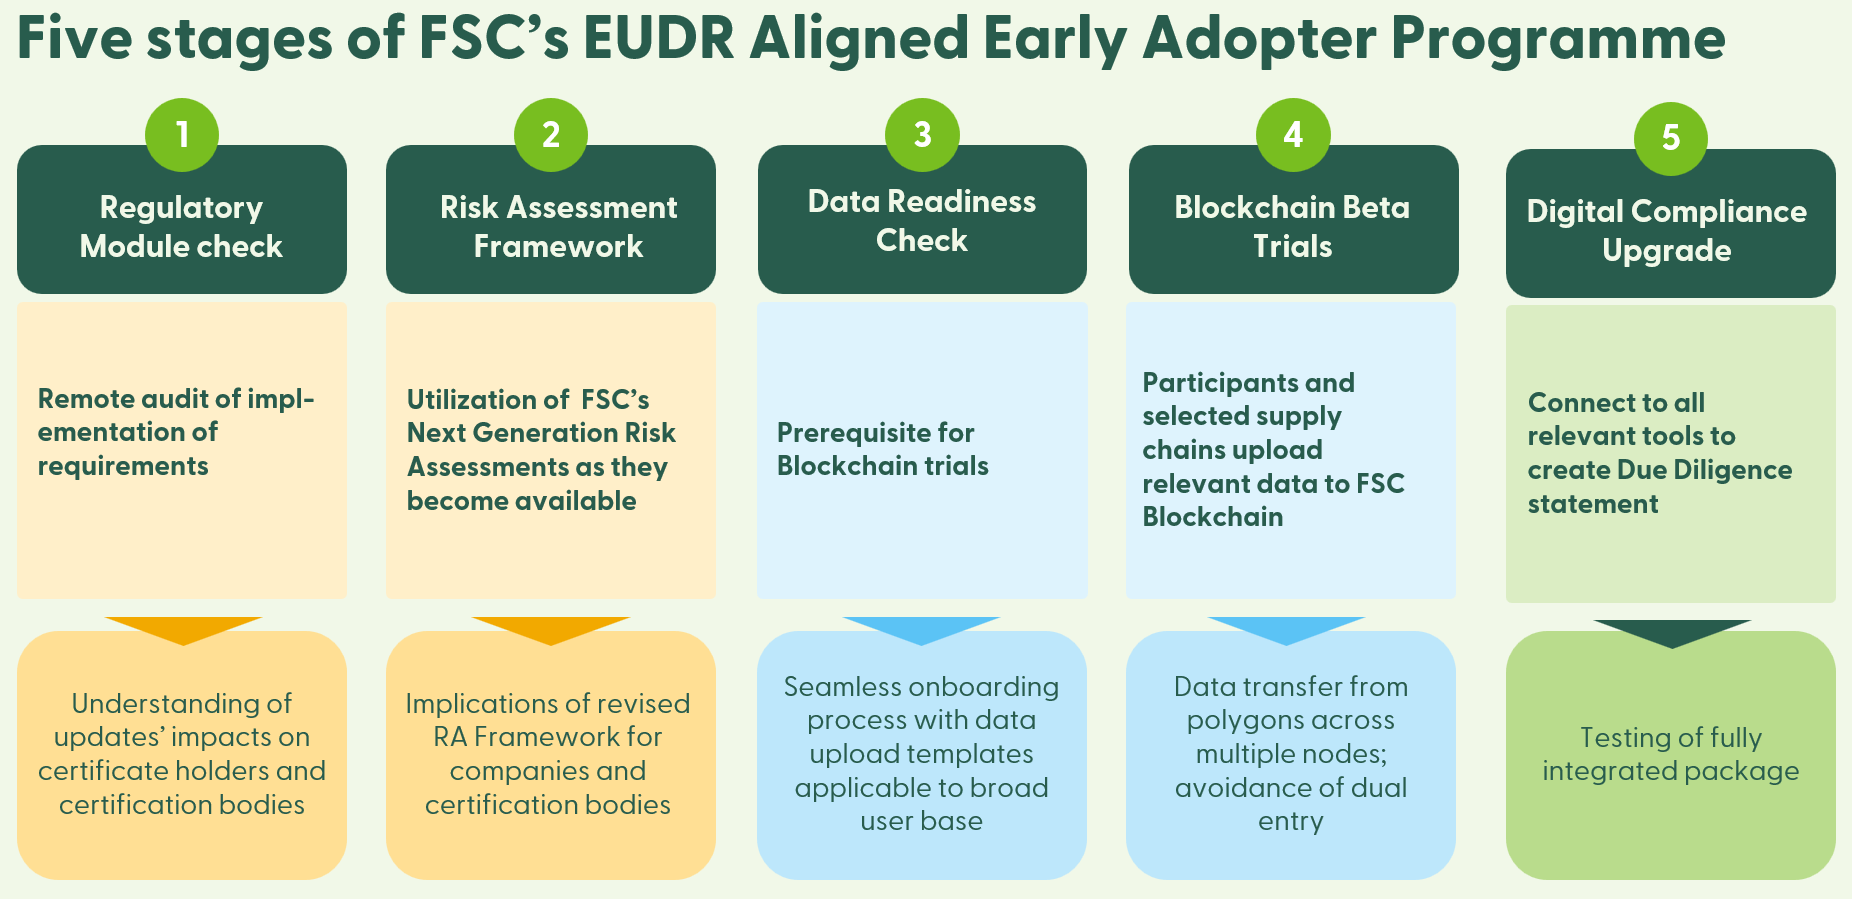 FSC EUDR Aligned Early Adopter Programme